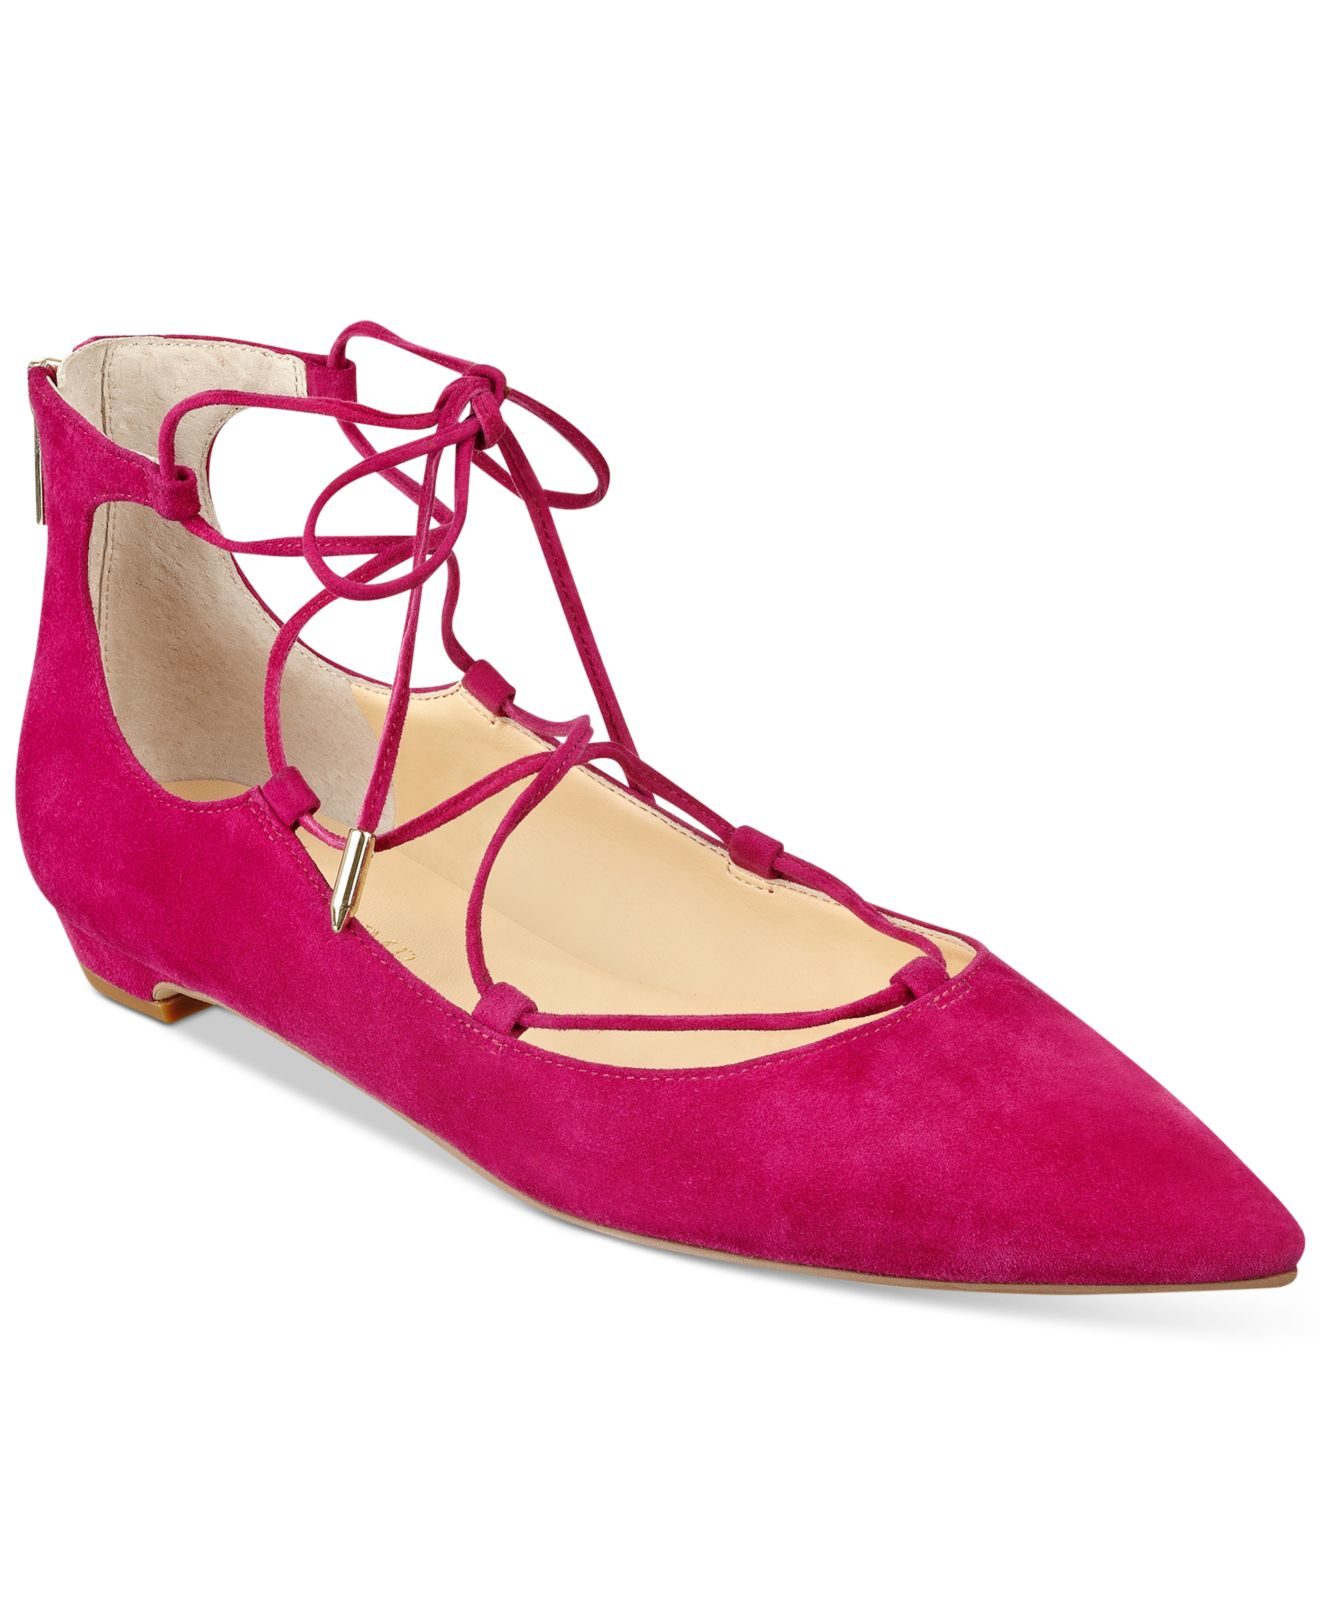 Lyst - Ivanka Trump Tropica Lace-up Flats in Pink